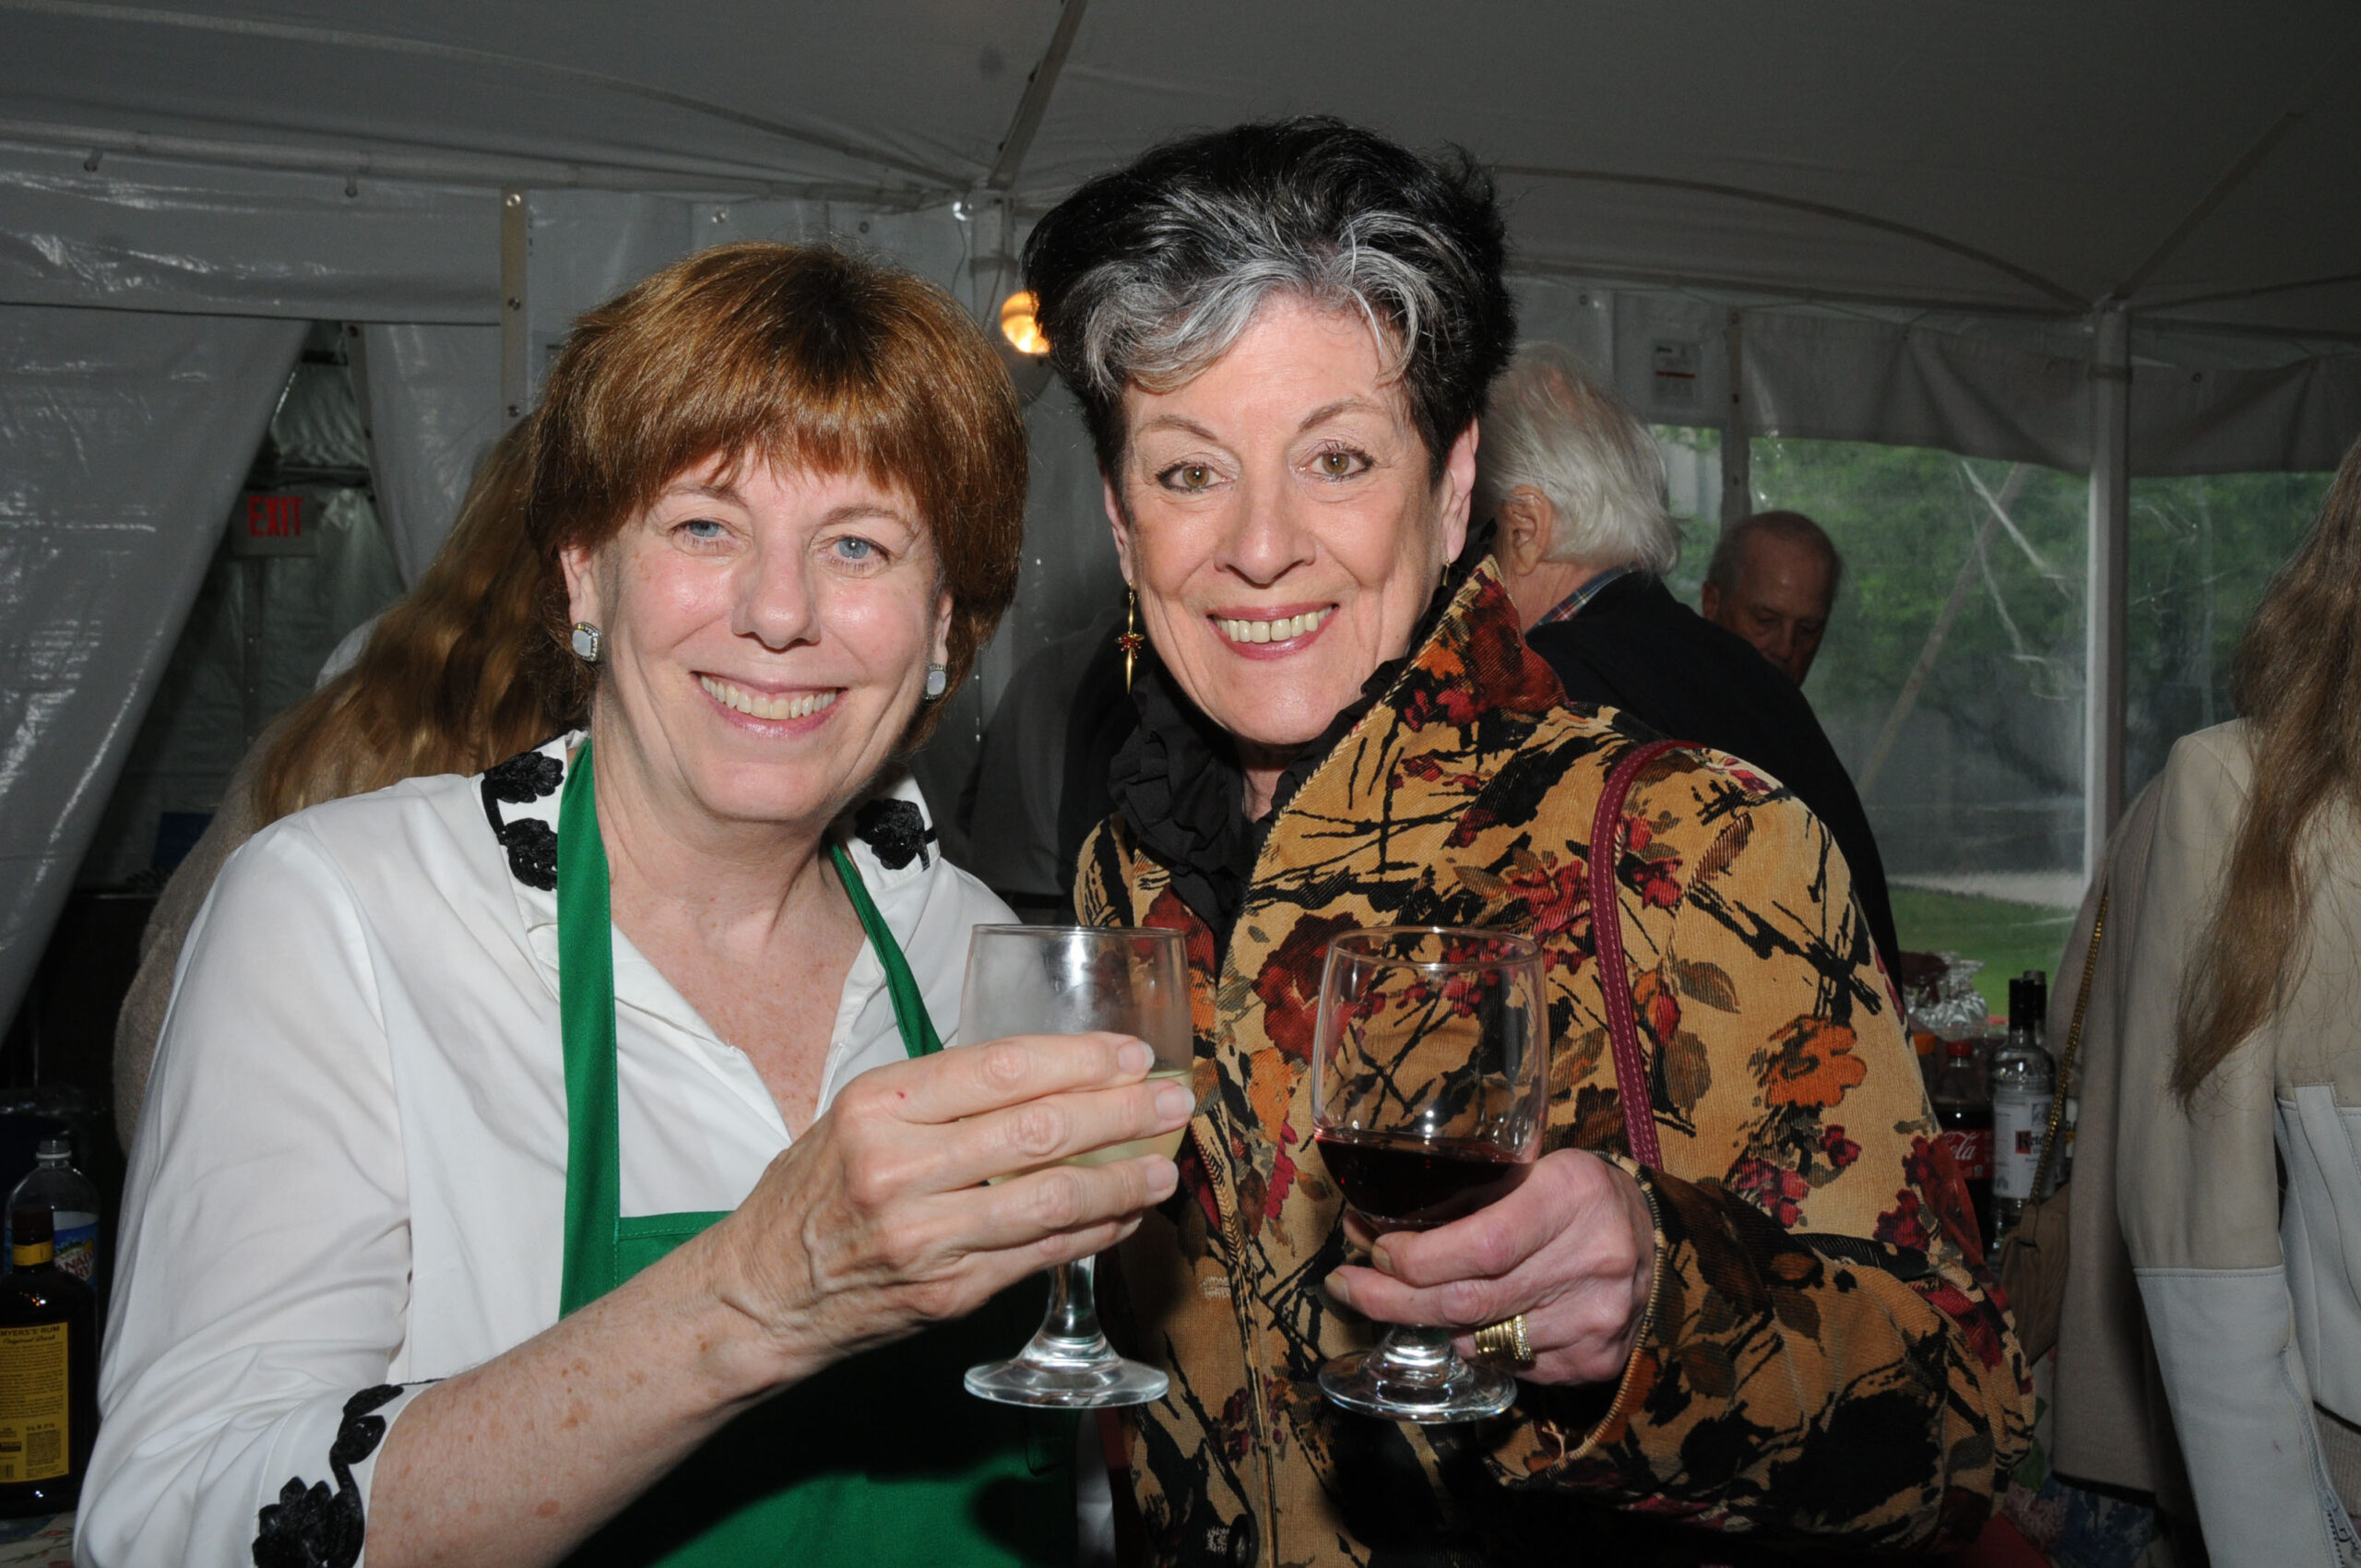 Julie Sakellariadis and Dianne Benson at the Garden Club of East Hampton's 46th Annual Garden Party and Plant Sale at  Mulford Farm on Friday evening.  RICHARD LEWIN